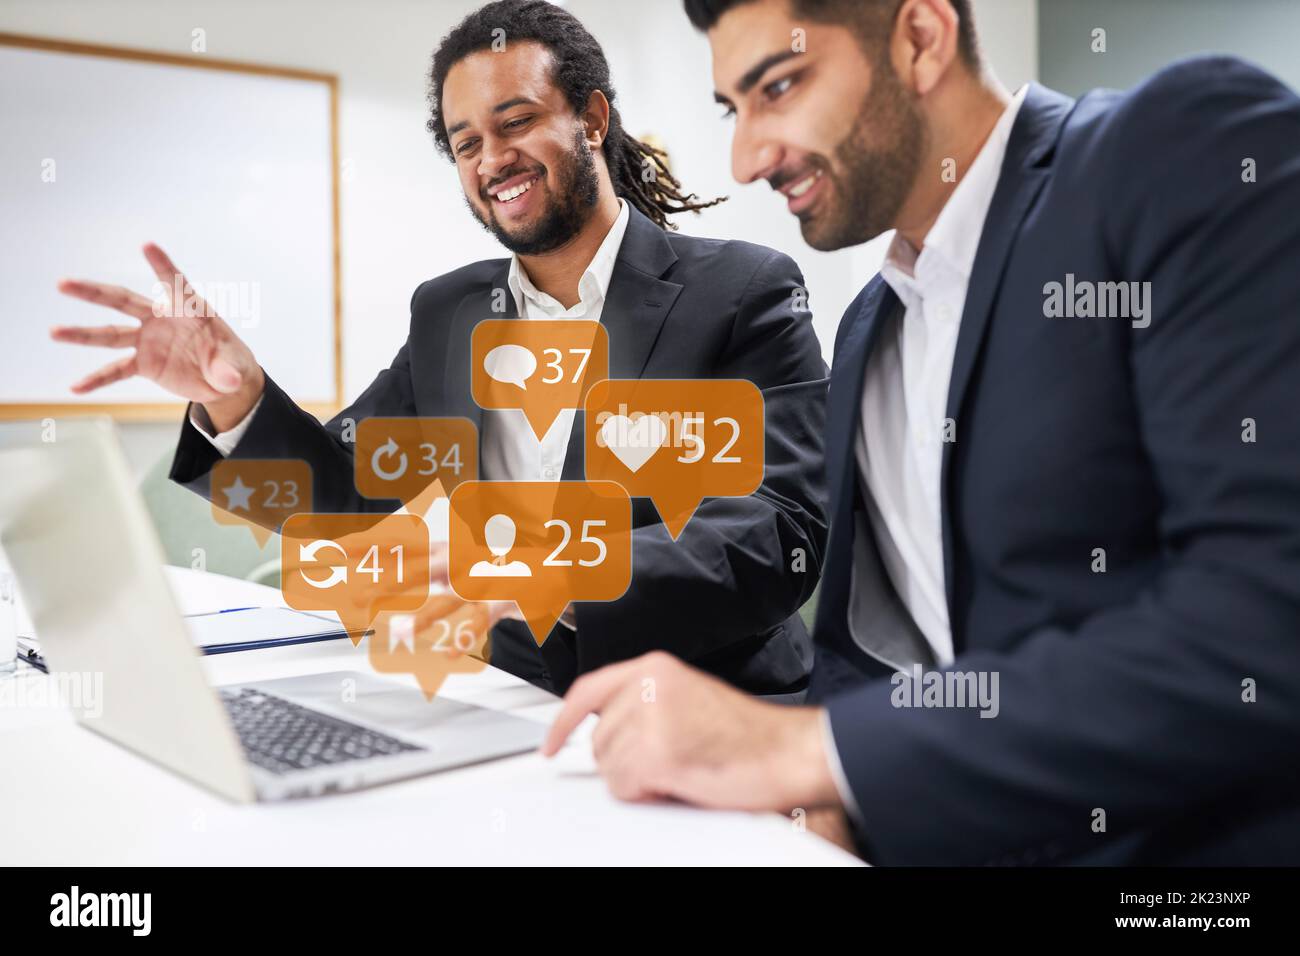 Two business people in the start-up creative team use social media together Stock Photo